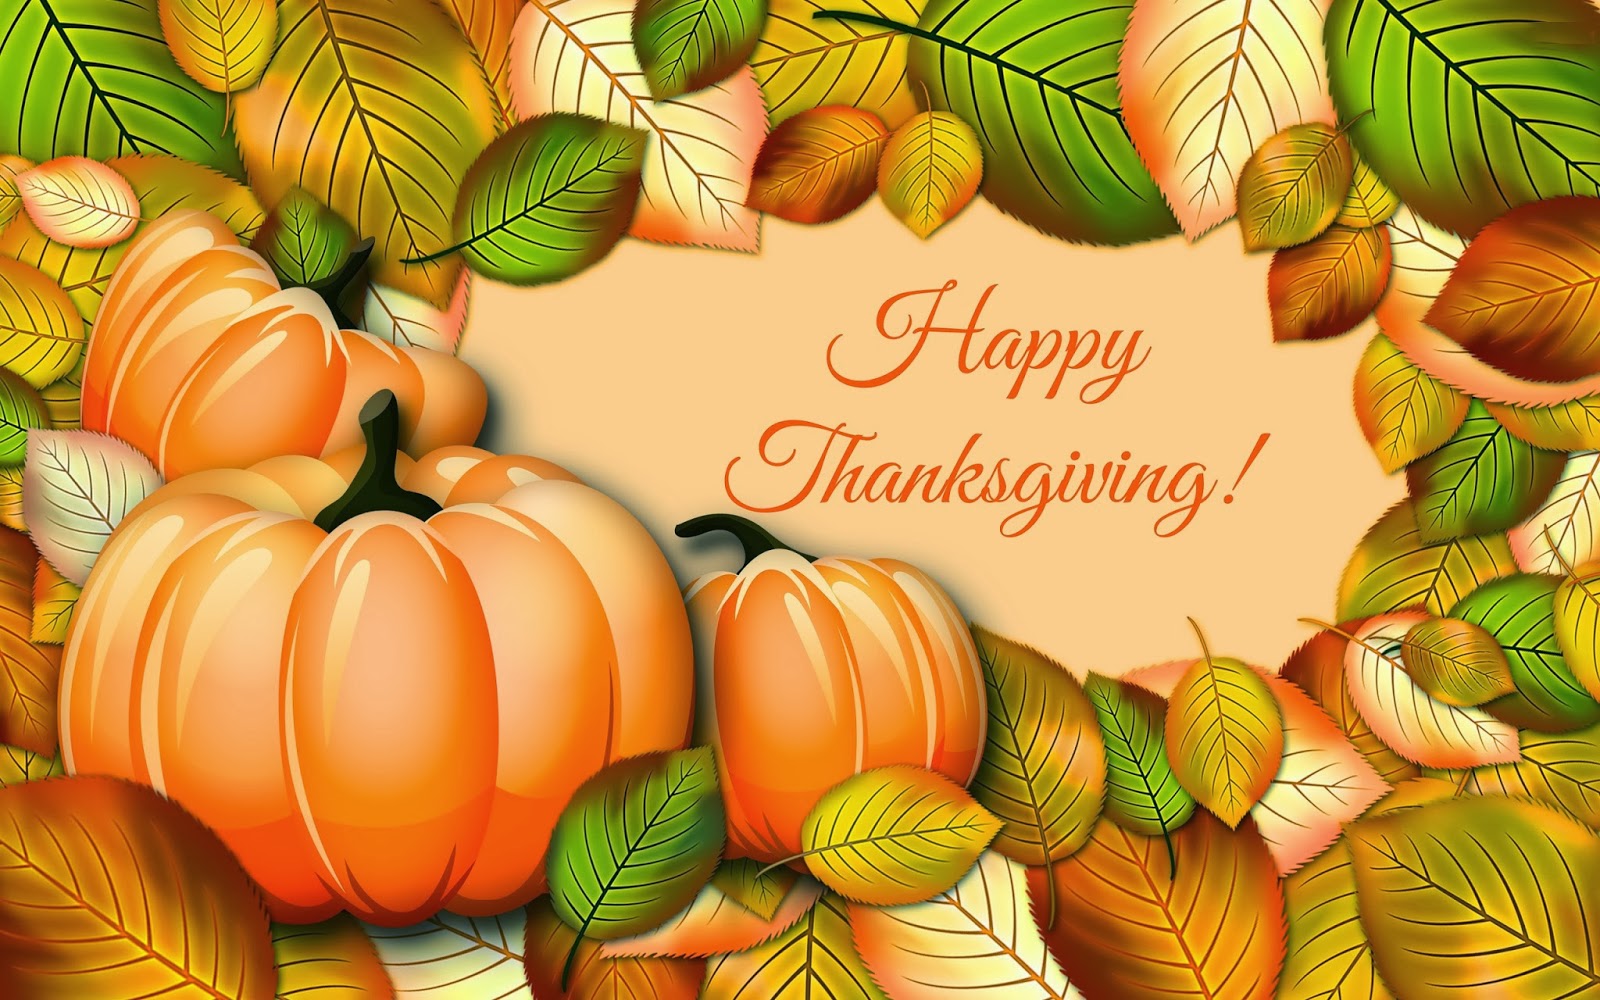  wishes for thanksgiving day best wallpaper for thanksgiving day